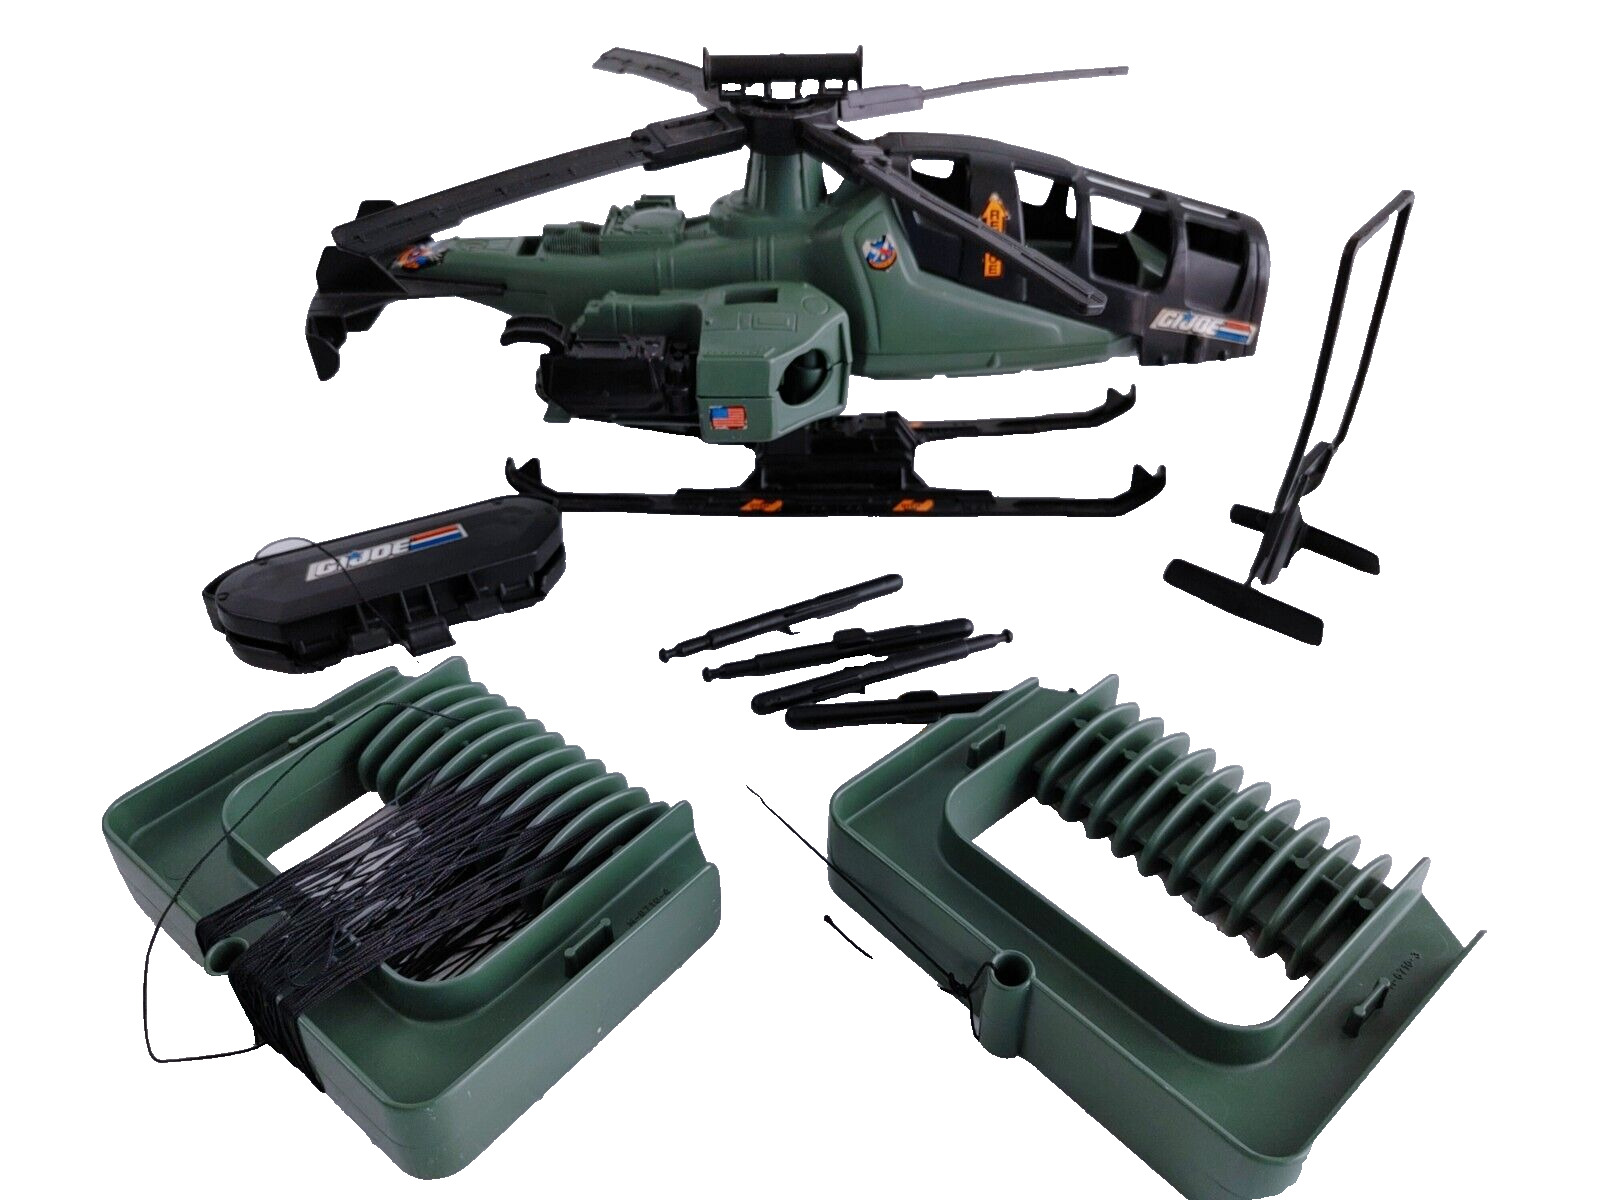 1994 GI Joe Battle Corps Razor-Blade Helicopter with Four Missiles #21635